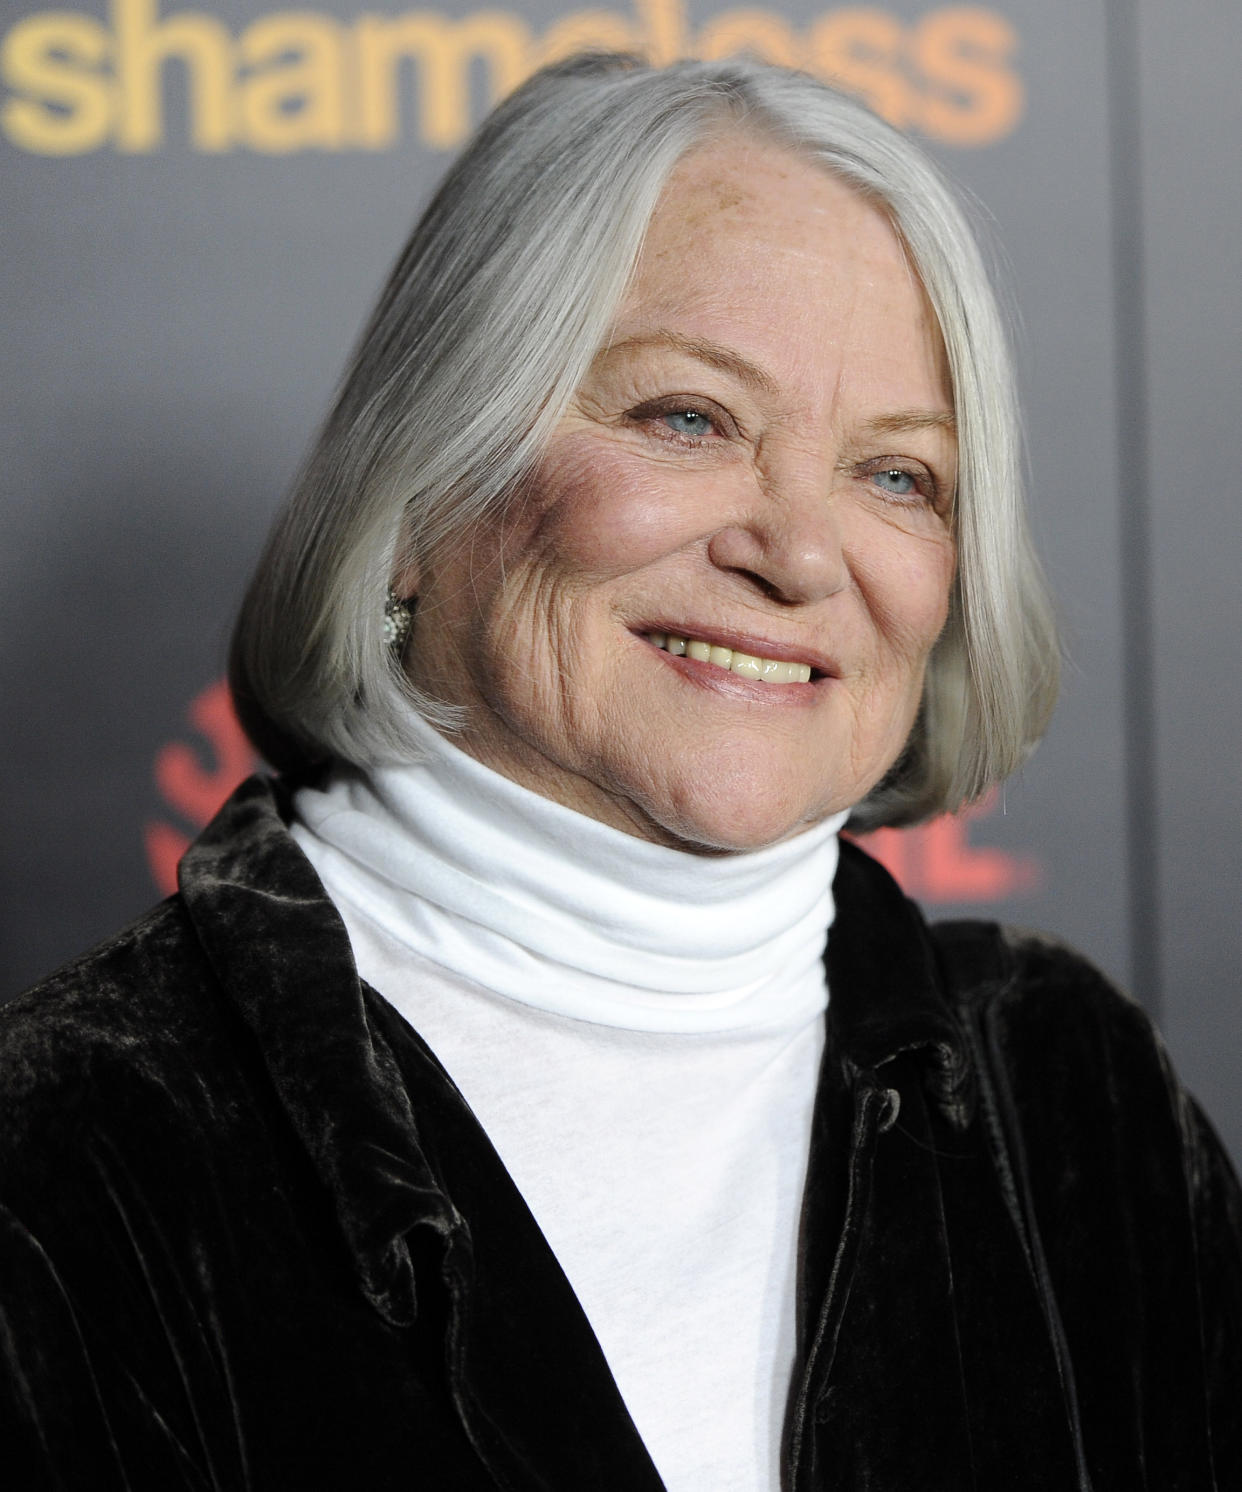 FILE - Louise Fletcher, a cast member in "Shameless," poses at the premiere of the second season of the Showtime television series in Los Angeles, Jan. 5, 2012. Fletcher, a late-blooming star whose riveting performance as the cruel and calculating Nurse Ratched in “One Flew Over the Cuckoo's Nest” set a new standard for screen villains and won her an Academy Award, died Friday, Sept. 23, 2022, at age 88. (AP Photo/Chris Pizzello, File)